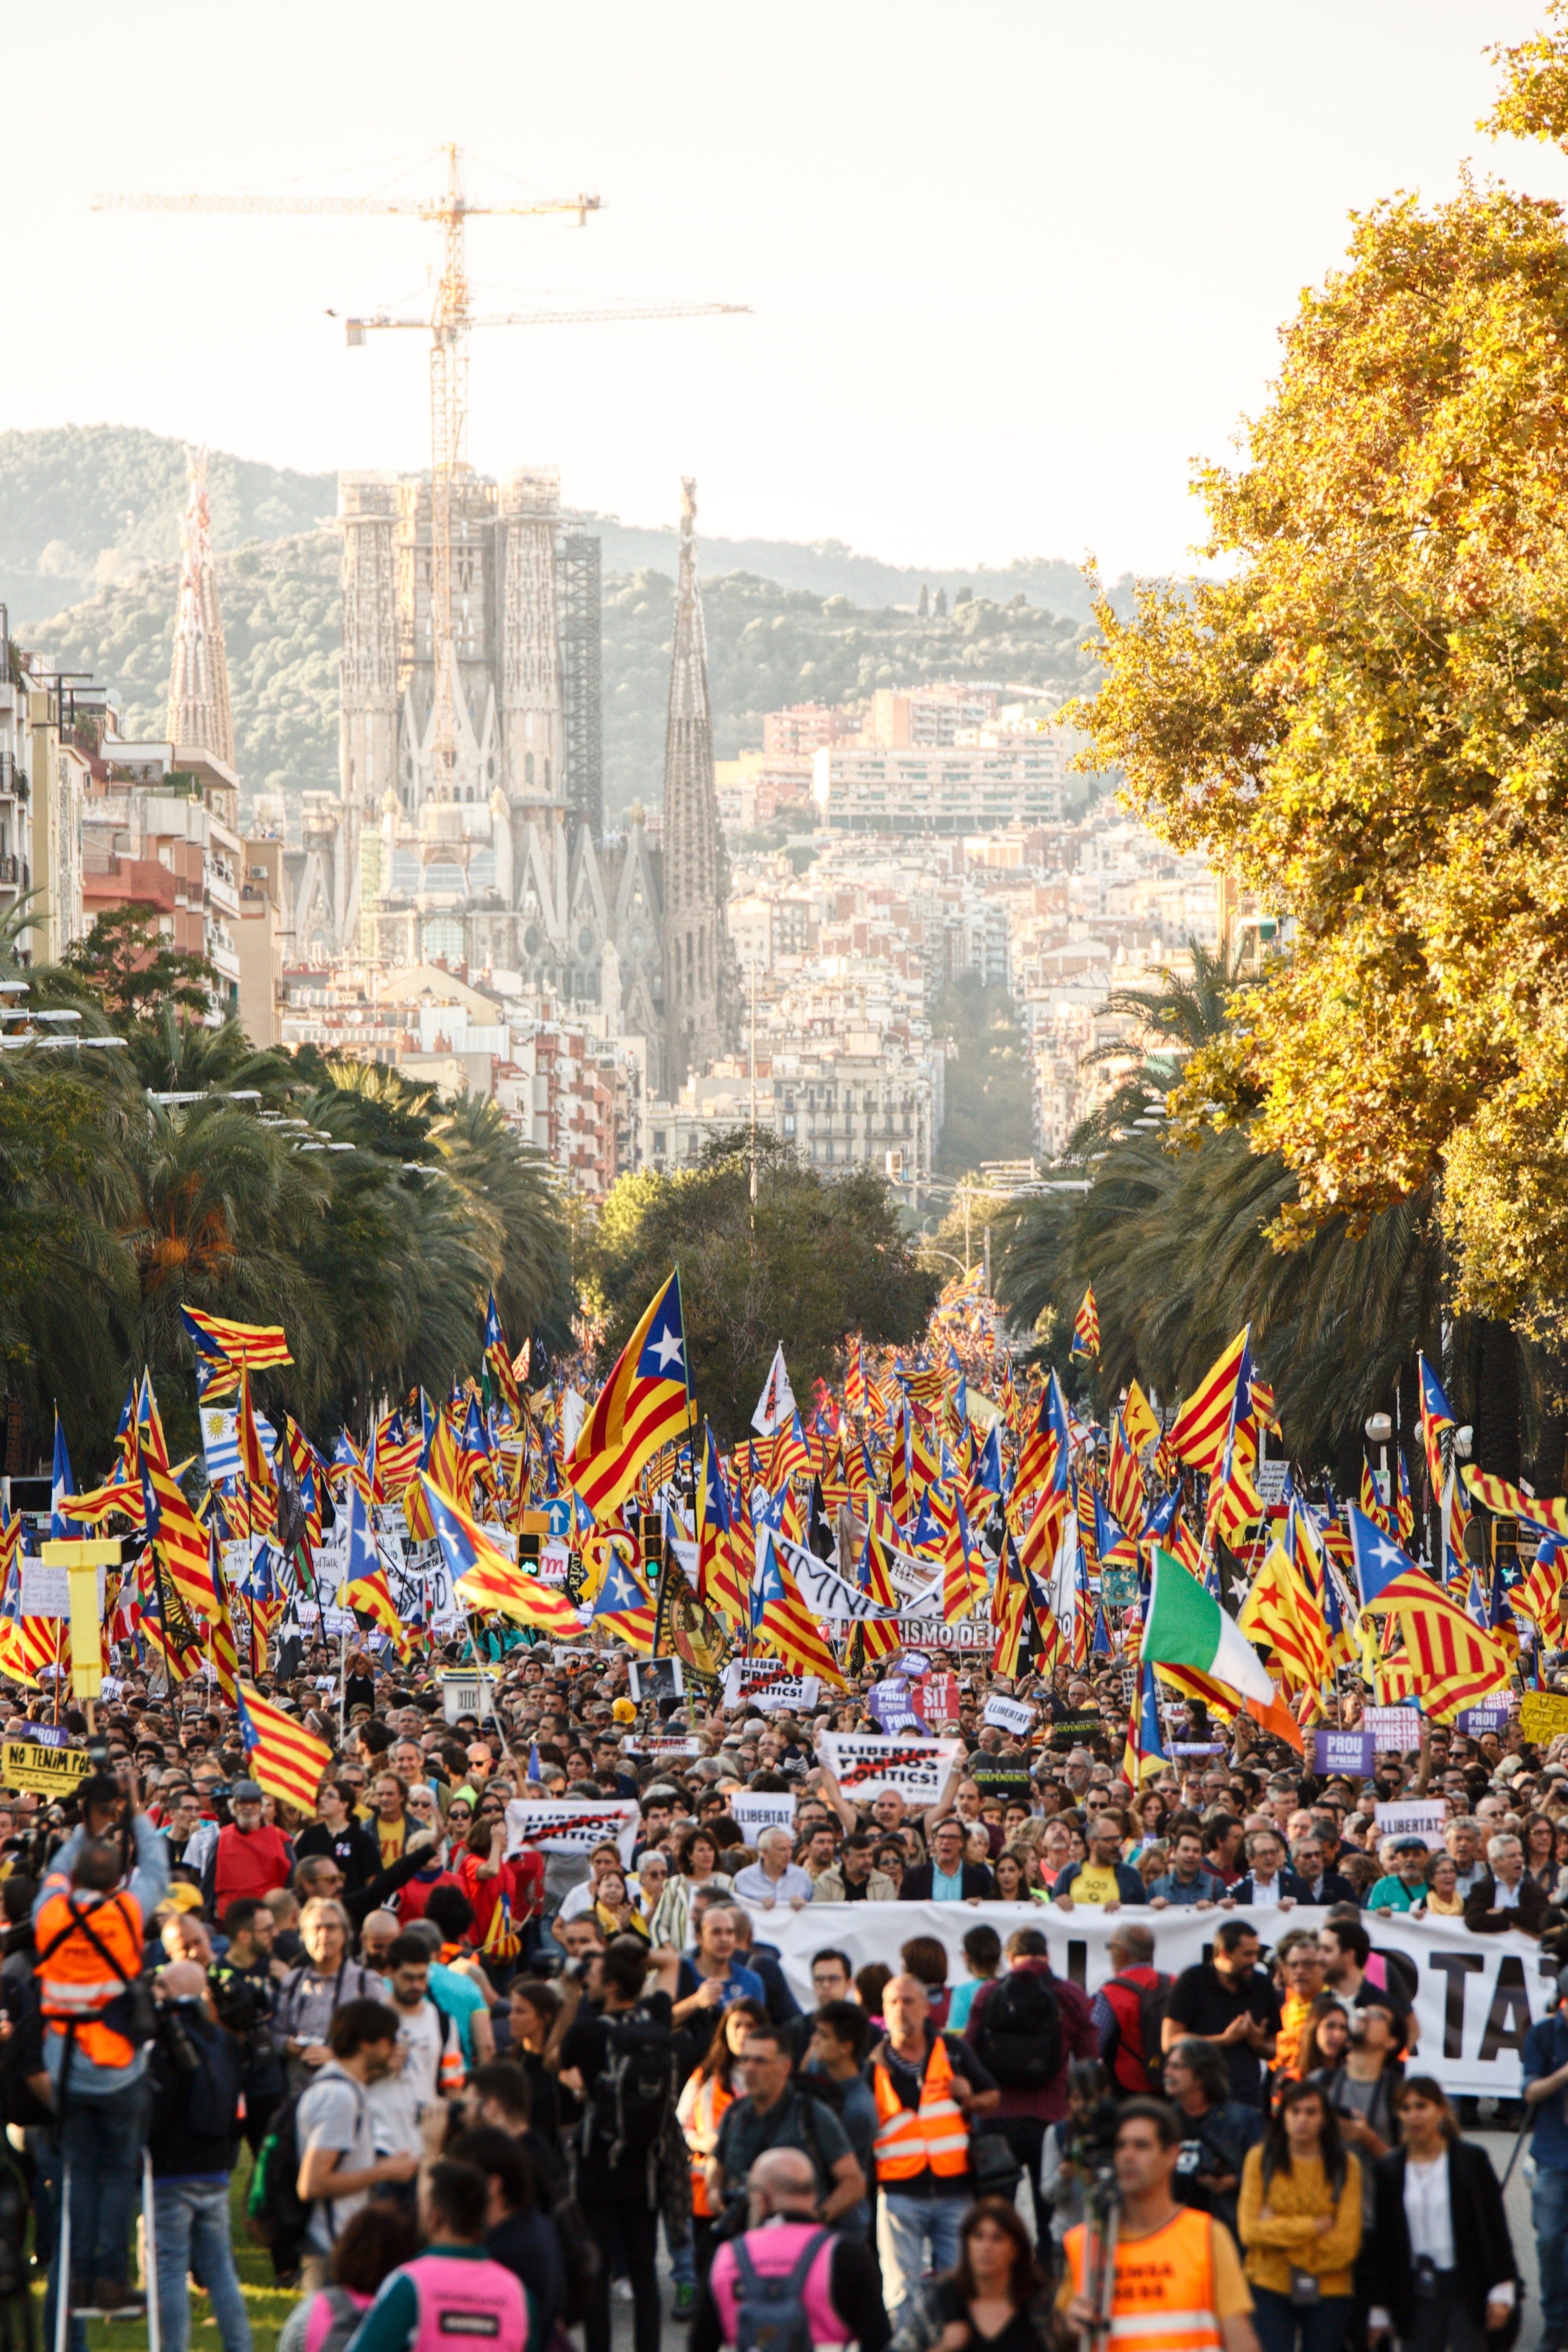 Hundreds of thousands call for "Liberty!" in new Catalan march against repression